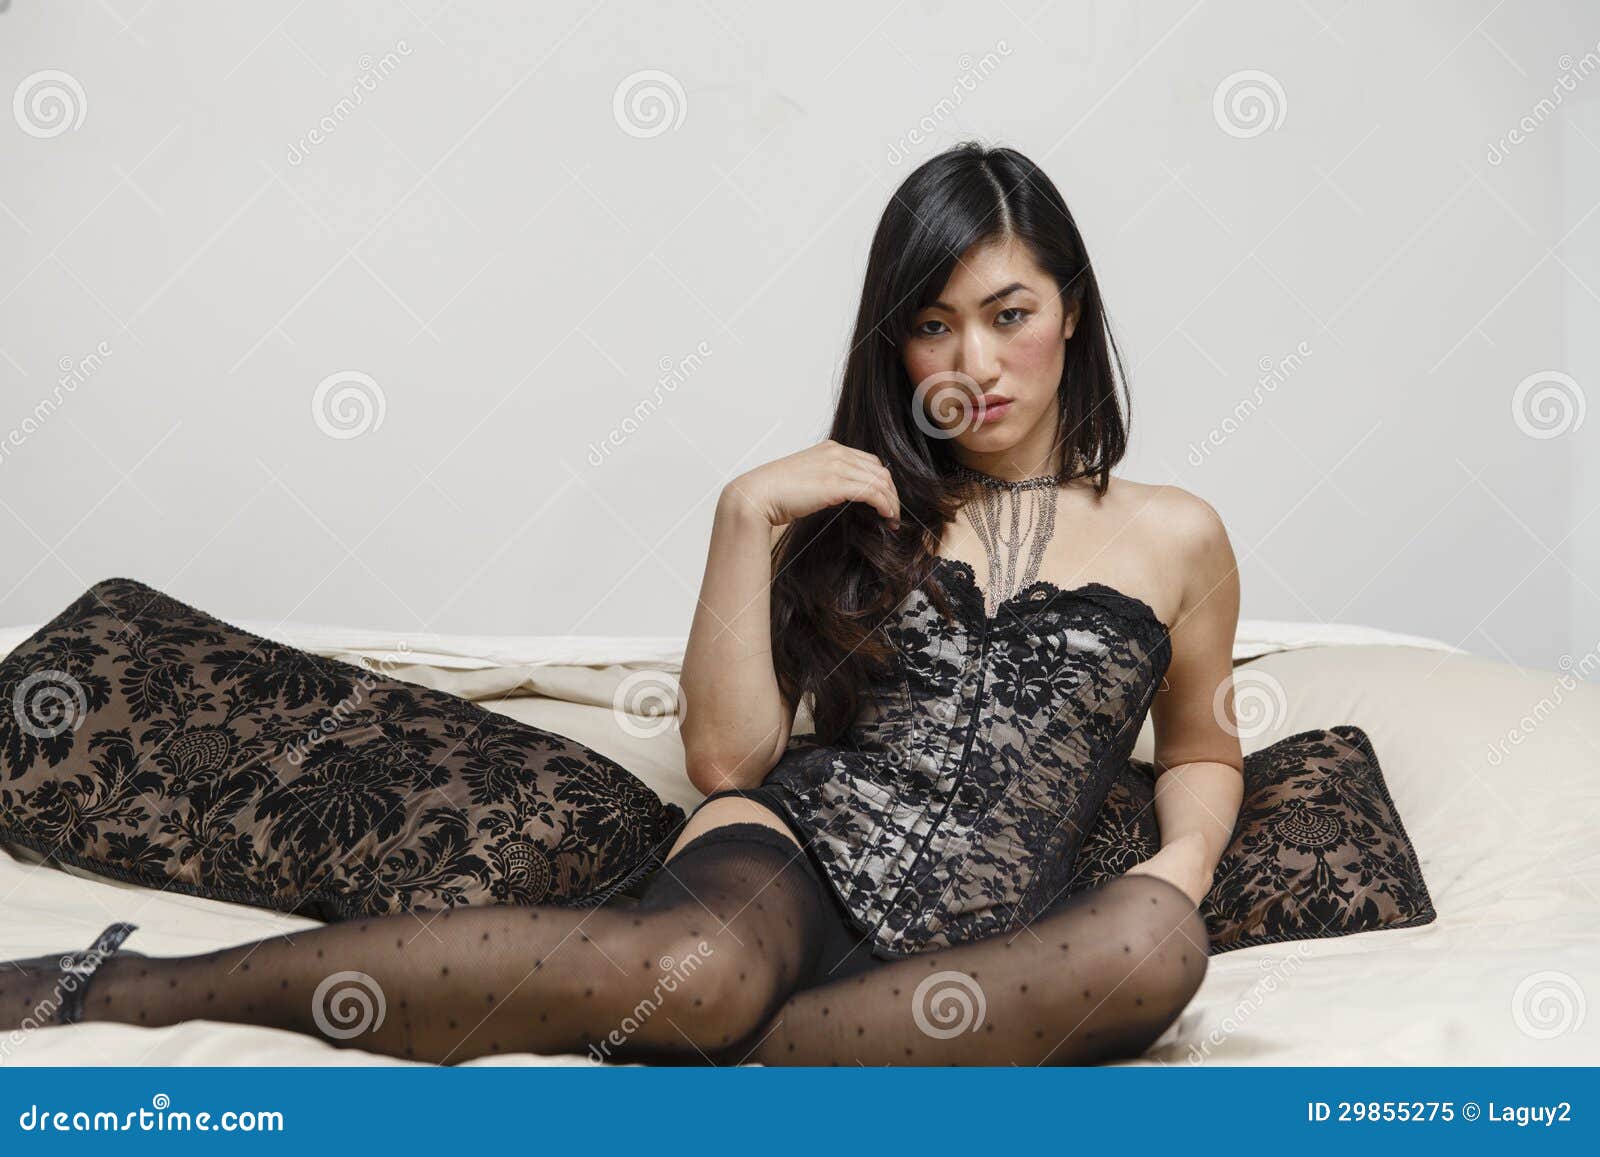 Hottest Asian Women In Porn - Beautiful Asian Women on a Bed Stock Image - Image of fashion, female:  29855275